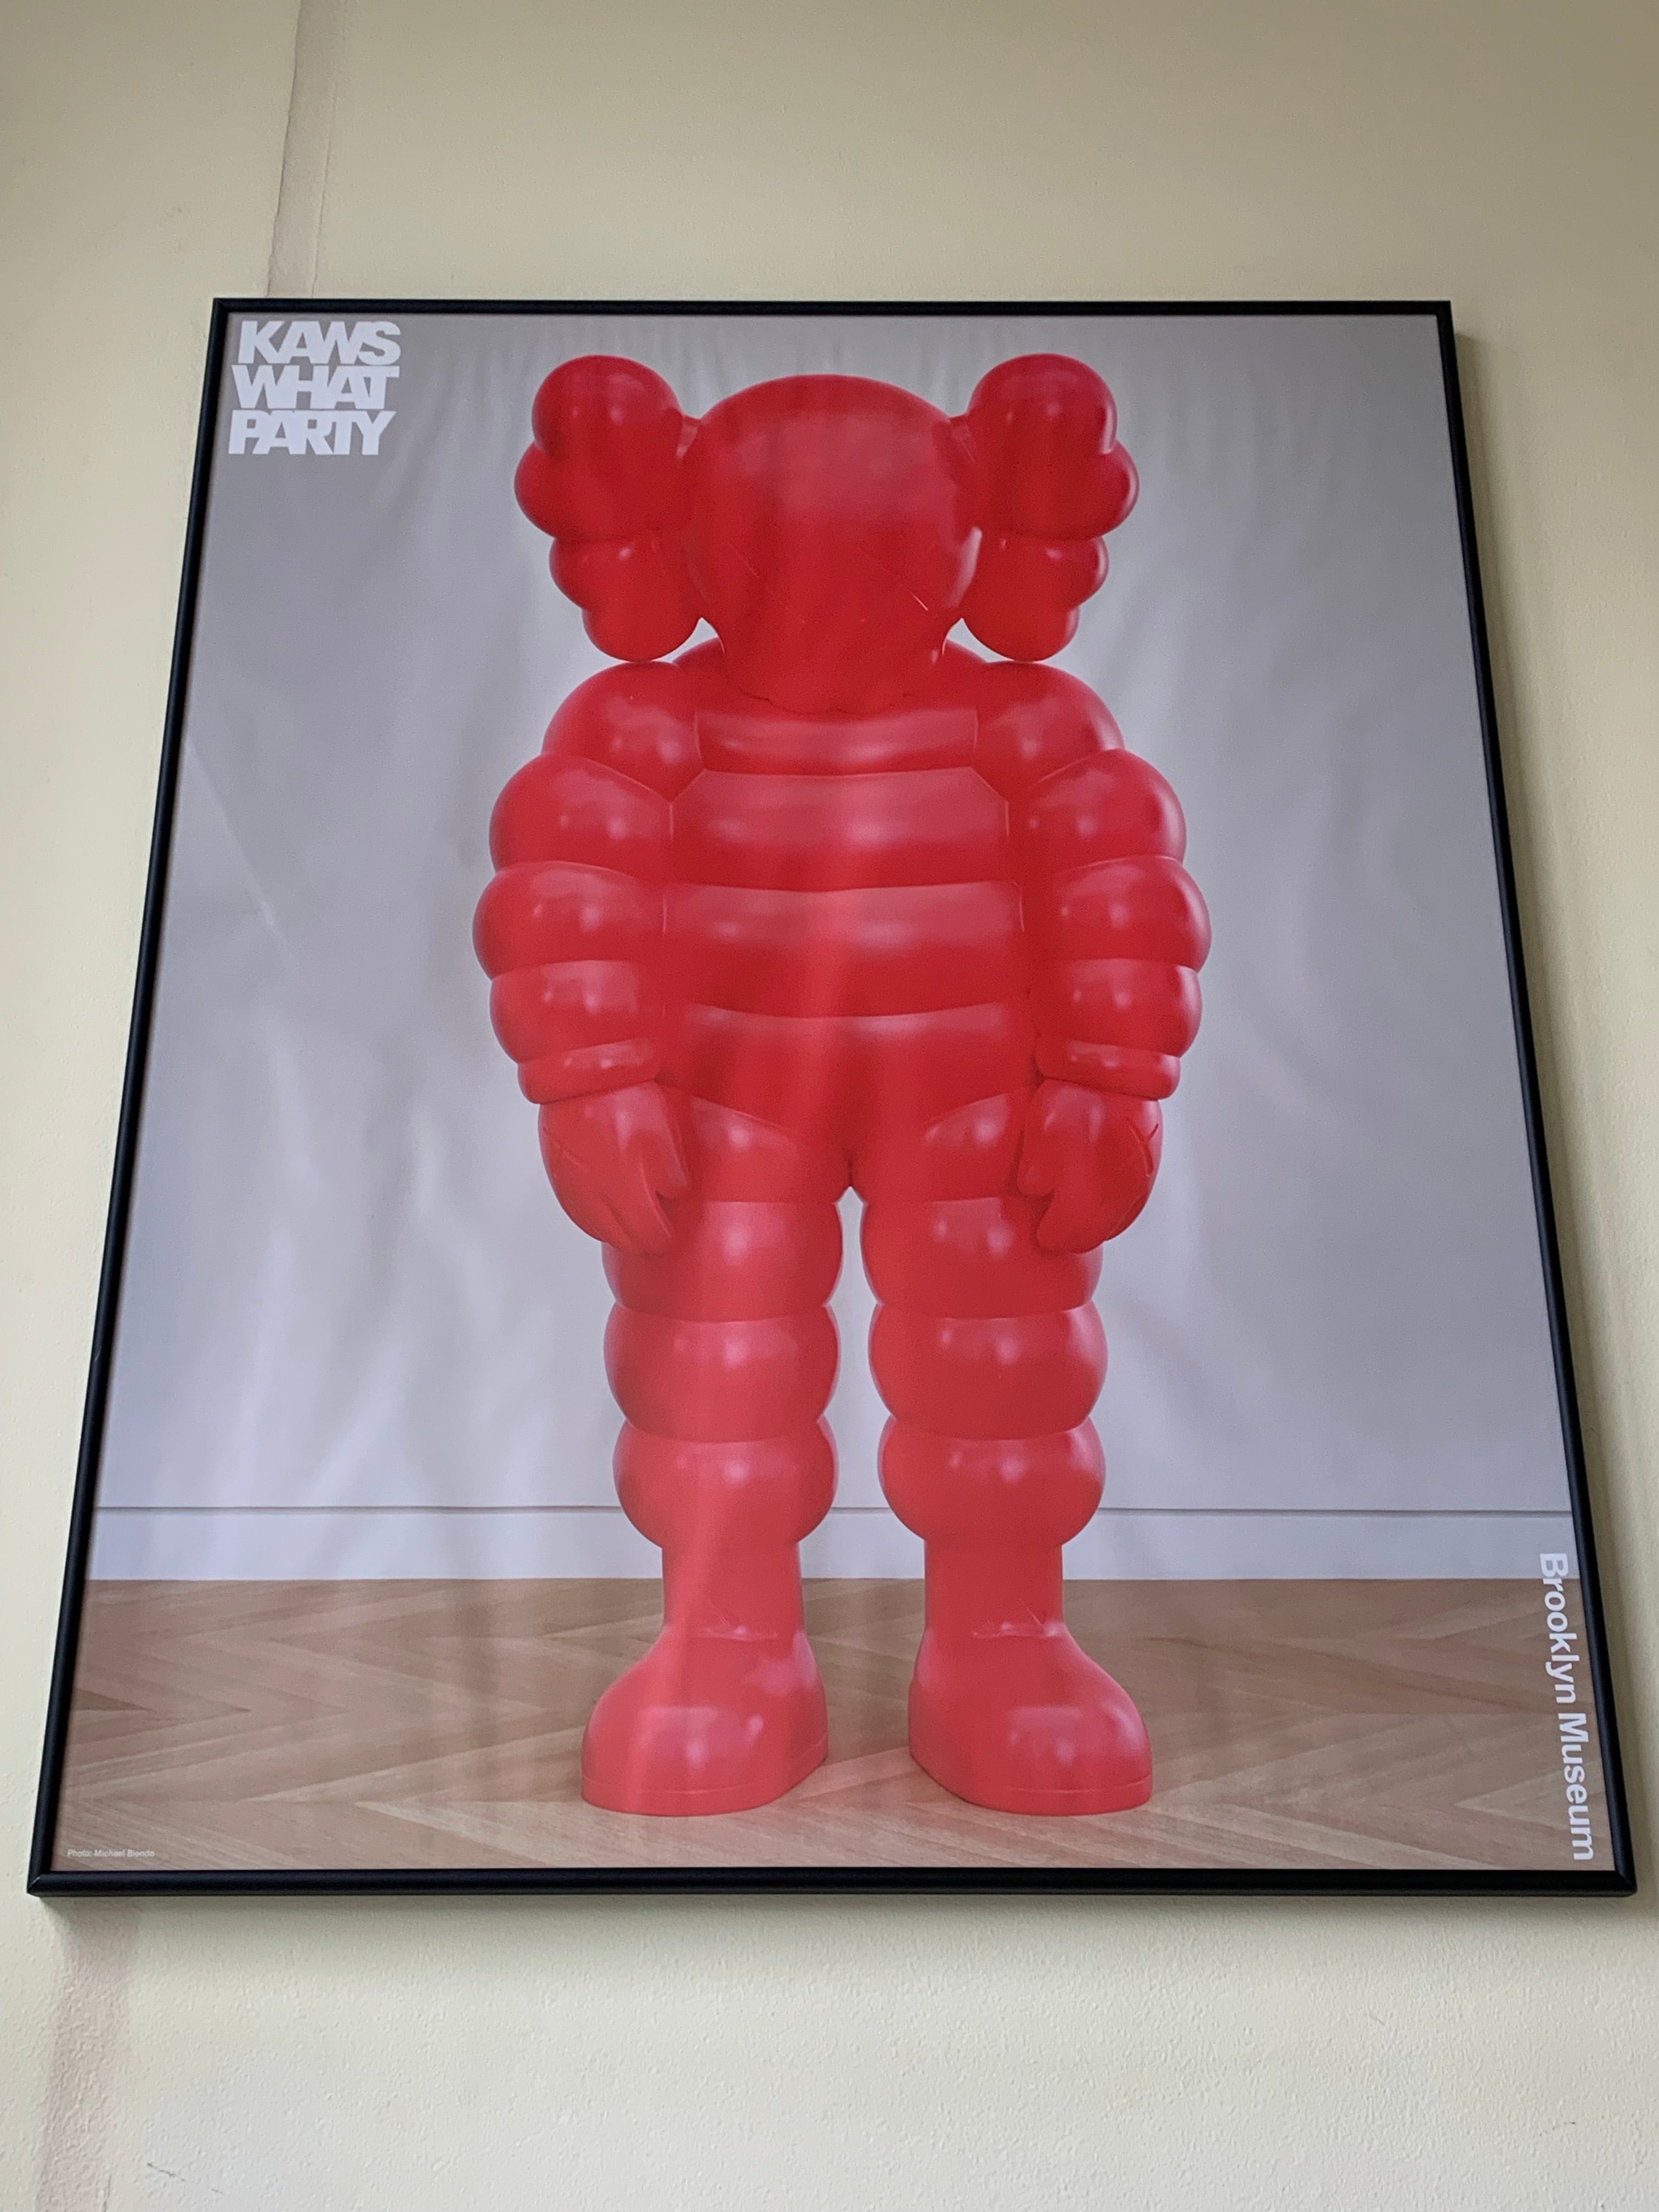 Kaws - What Party